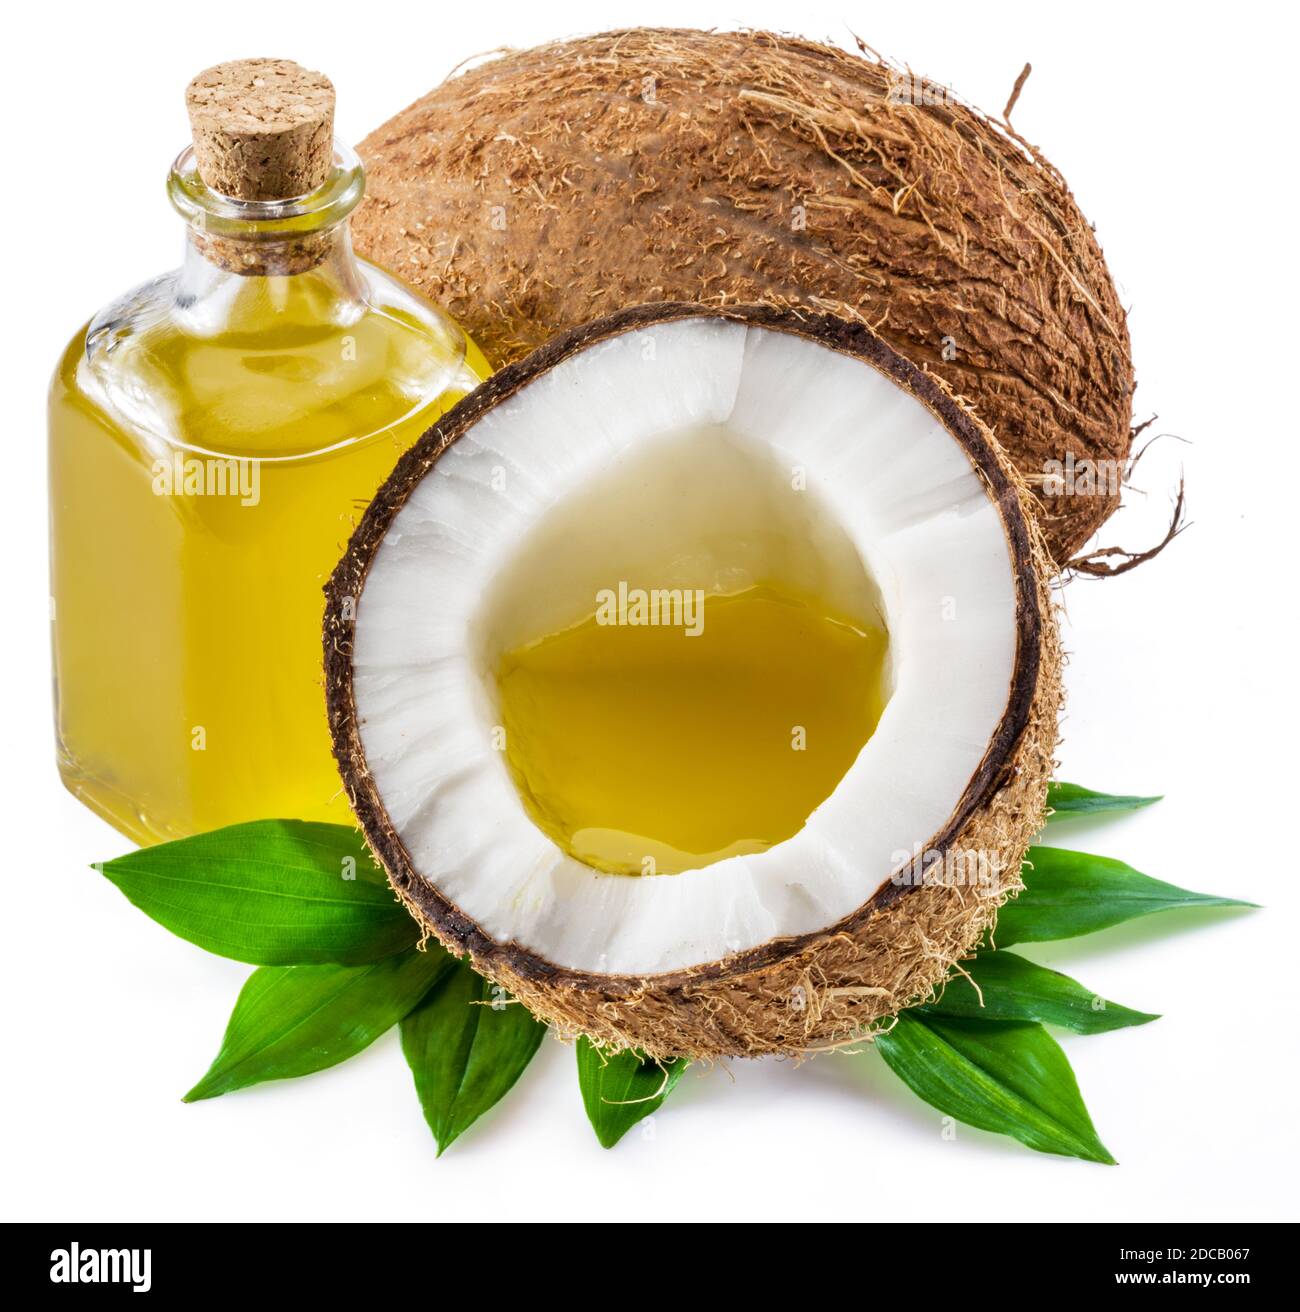 Cracked coconut fruit and coconut oil isolated on white background. Stock Photo